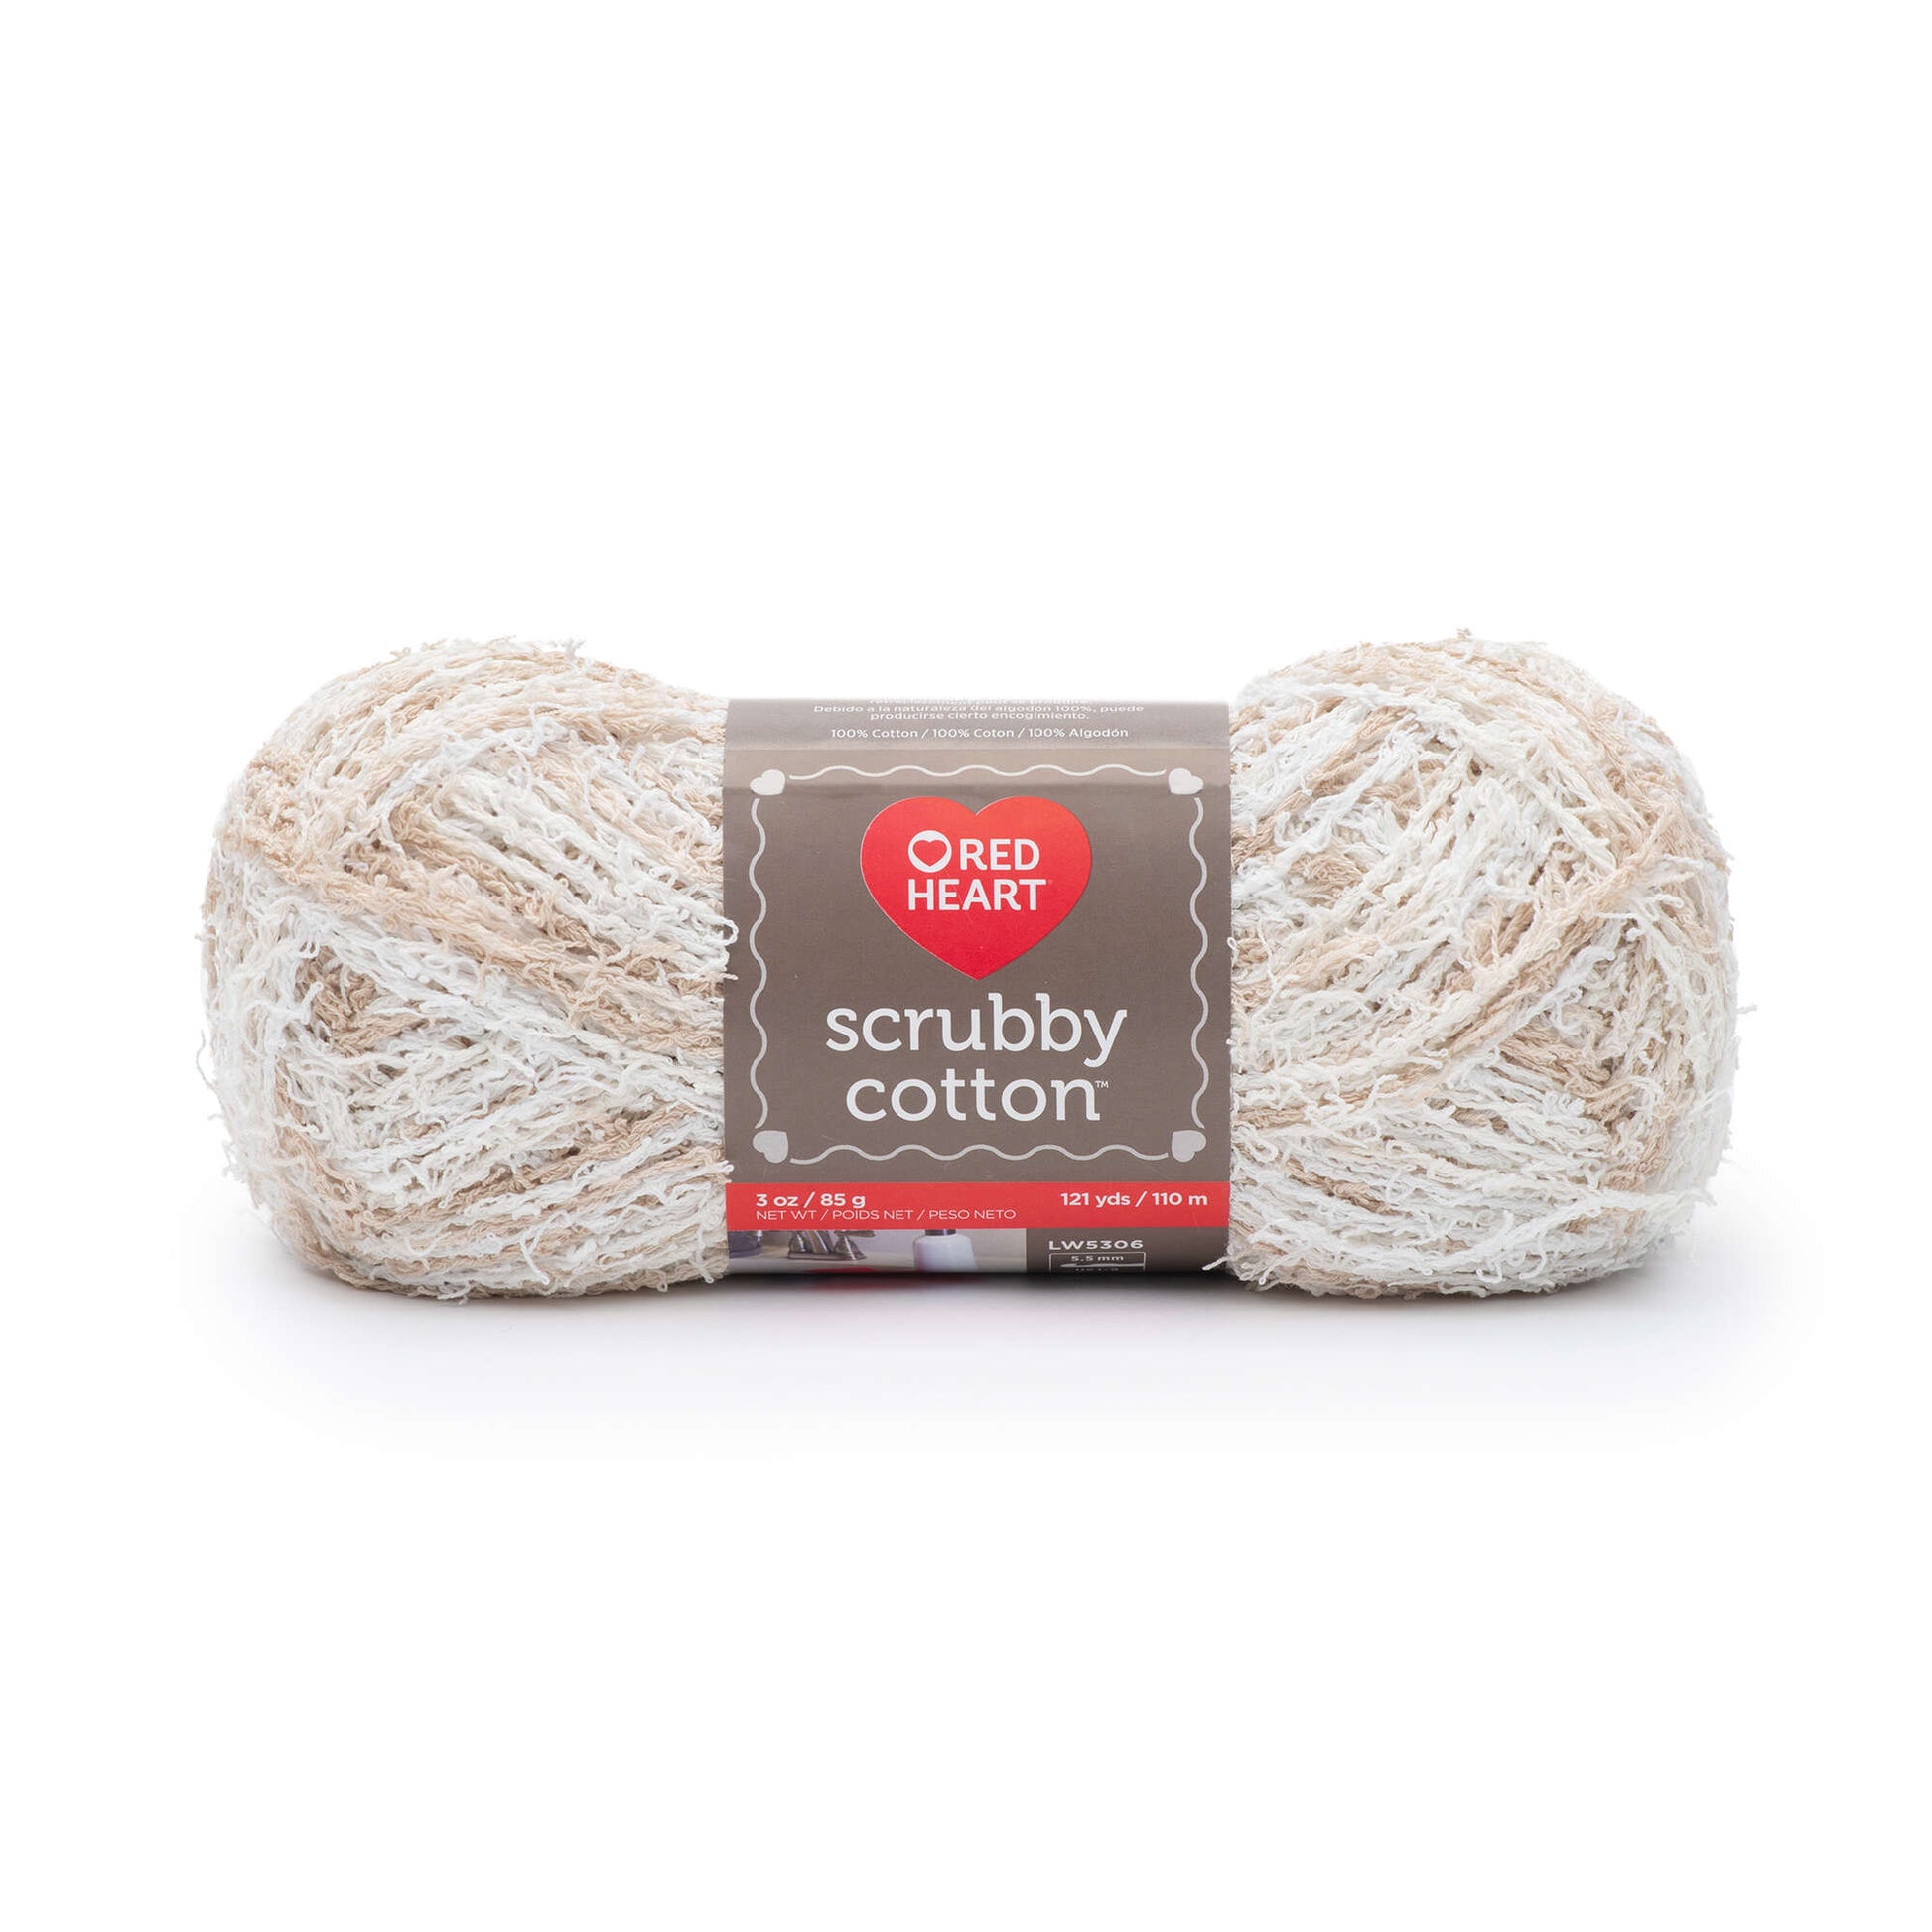 Red Heart Scrubby Cotton Yarn - Discontinued shades